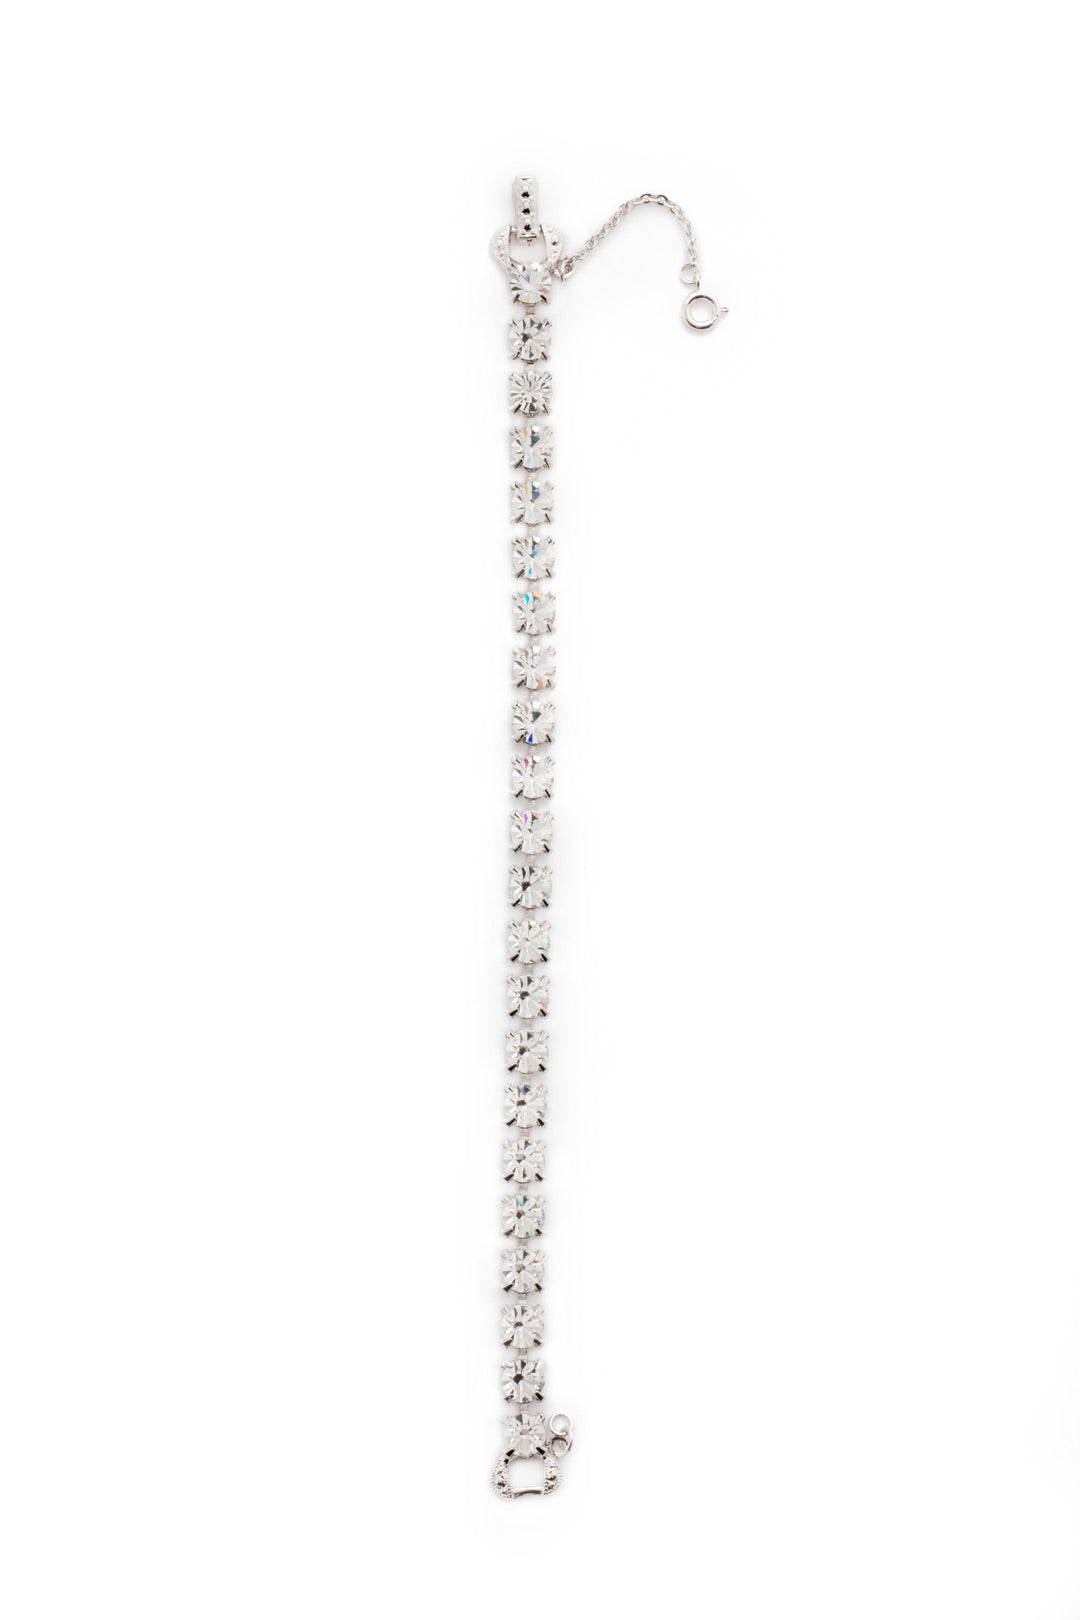 Repeating Round Tennis Bracelet - BCZ36RHCRY - <p>Understated elegance. Repeating round crystals create a delicate strand of sparkle suited for anyone's style. From Sorrelli's Crystal collection in our Palladium Silver-tone finish.</p>